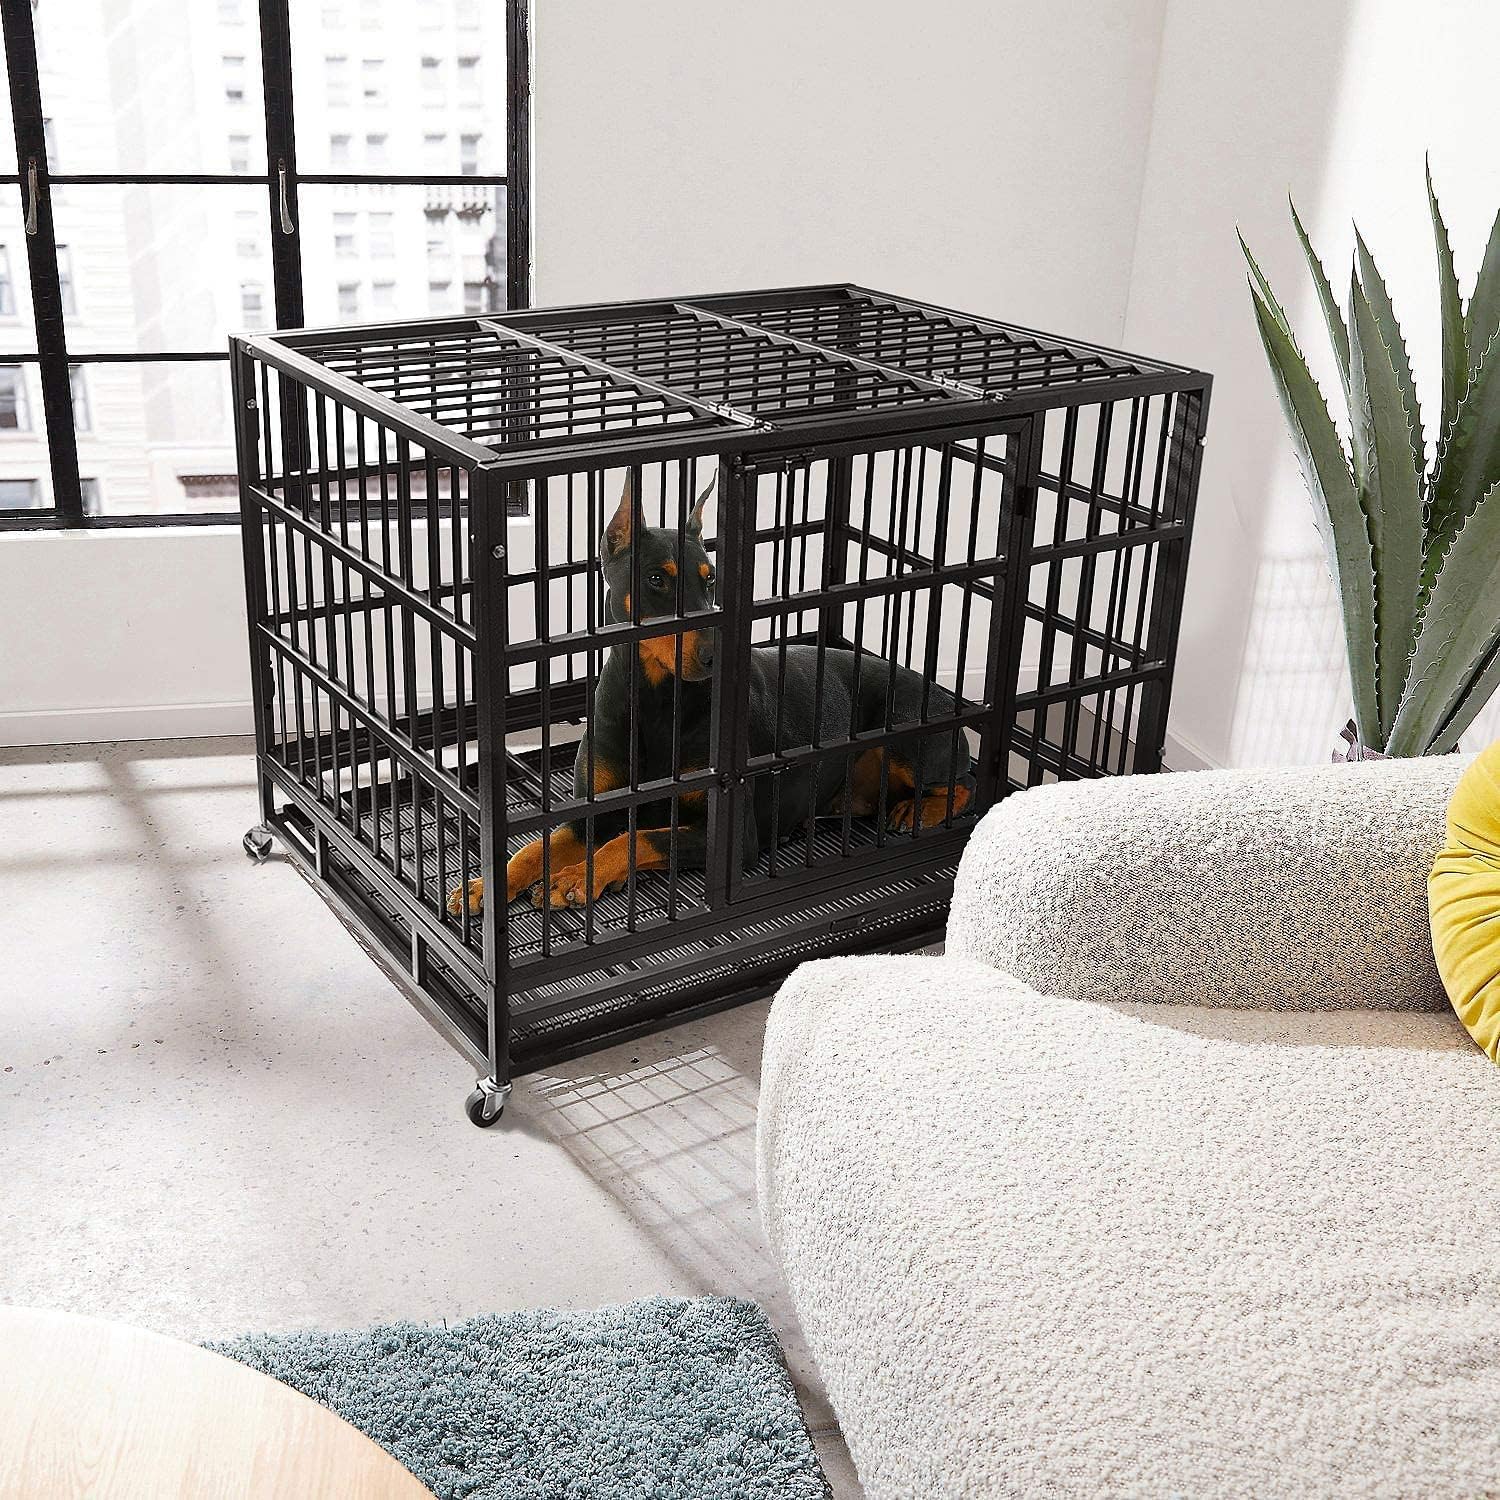 48 Inch Heavy Duty Dog Crate Cage Kennel with Wheels, High Anxiety Indestructible, Sturdy Locks Design